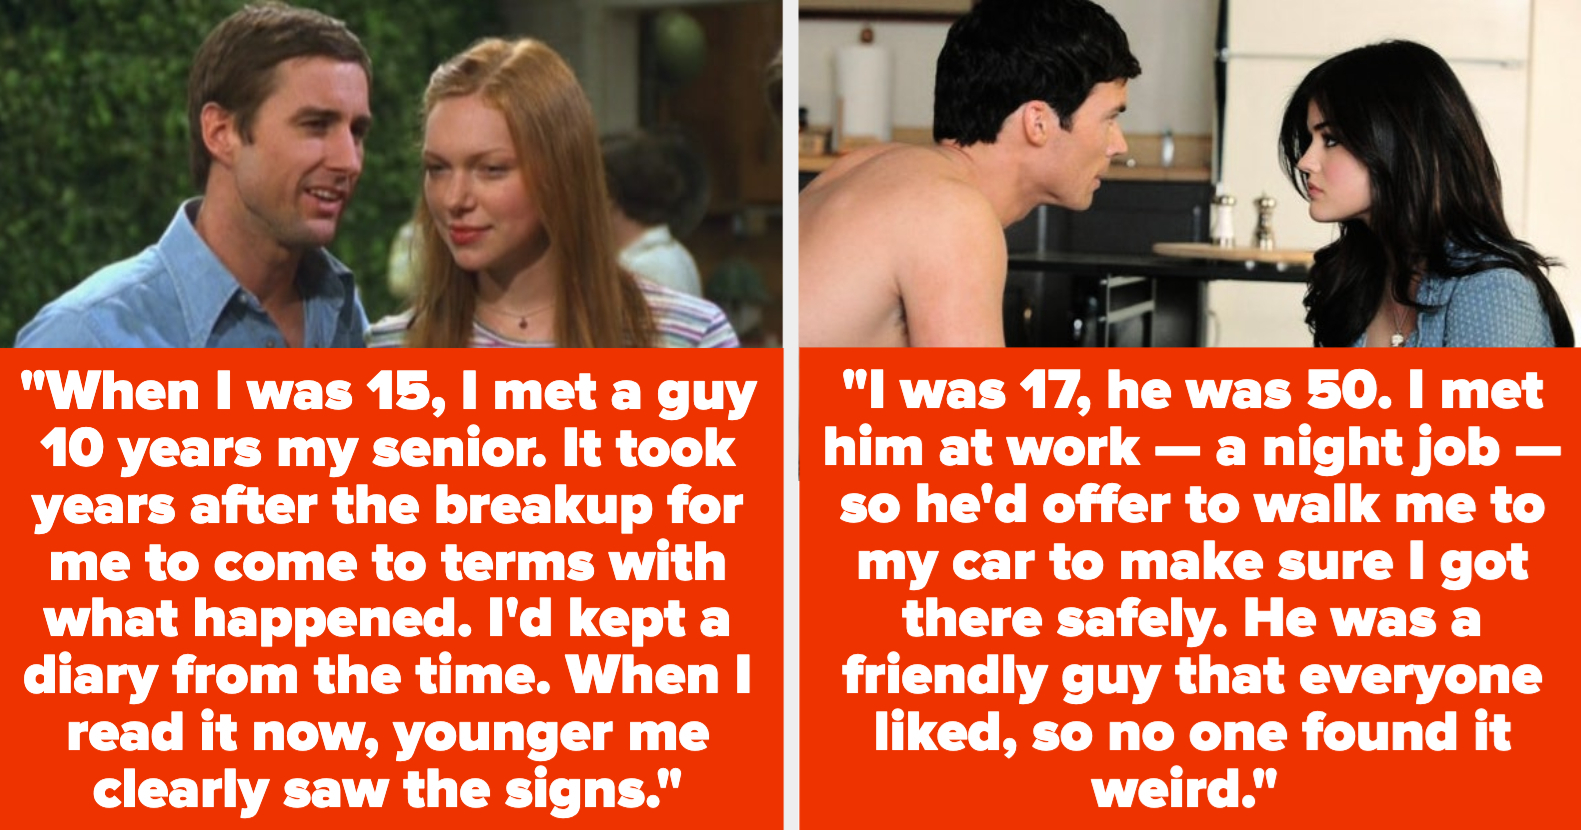 Women Who “Dated” Predatory Older Men As Teens Share Their Stories image